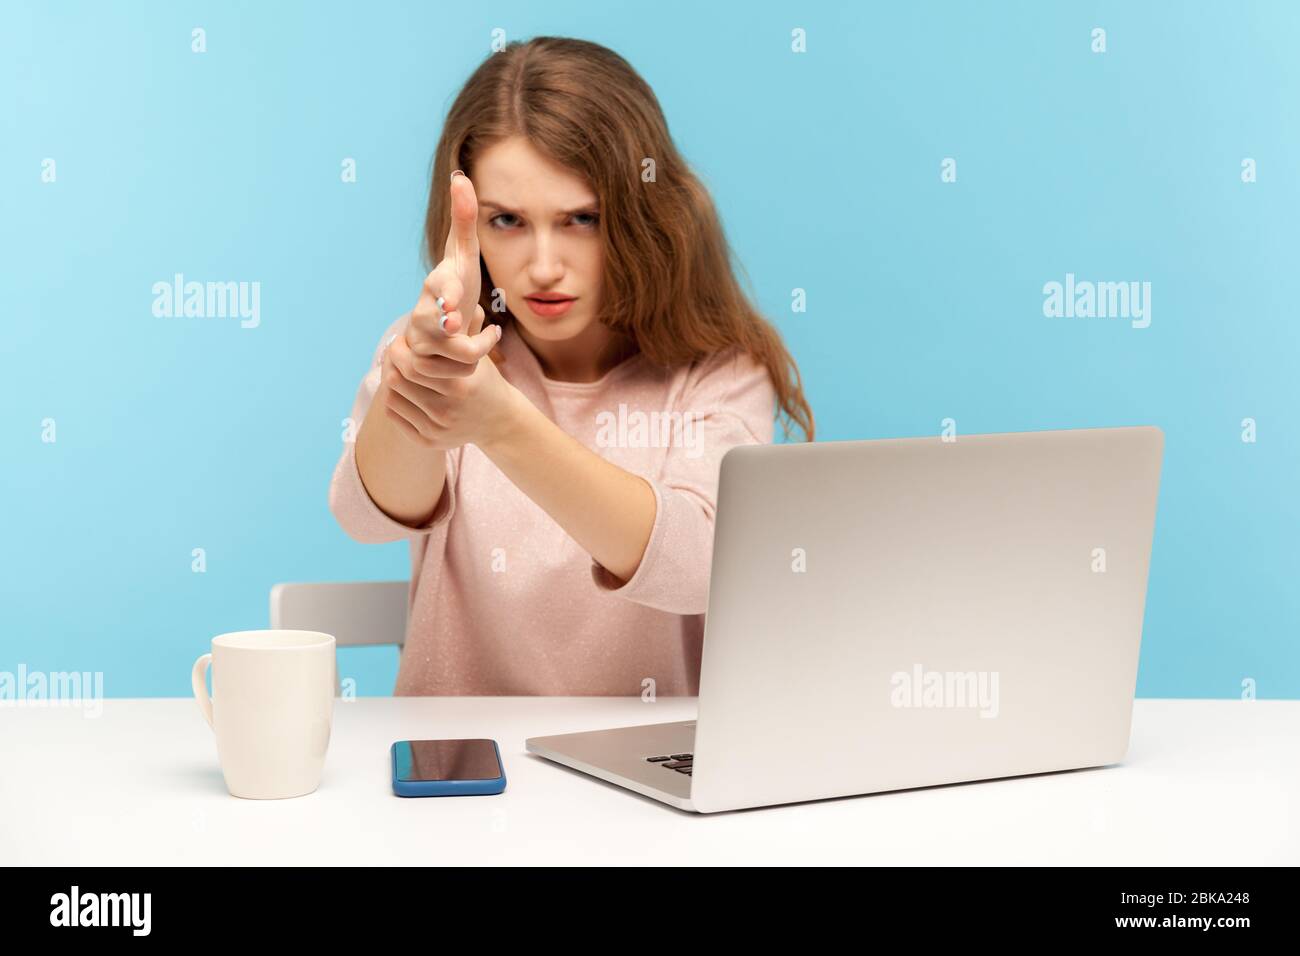 Angry woman employee sitting at workplace with laptop threatening and pointing finger gun to camera, shooting with aggressive expression, aiming targe Stock Photo